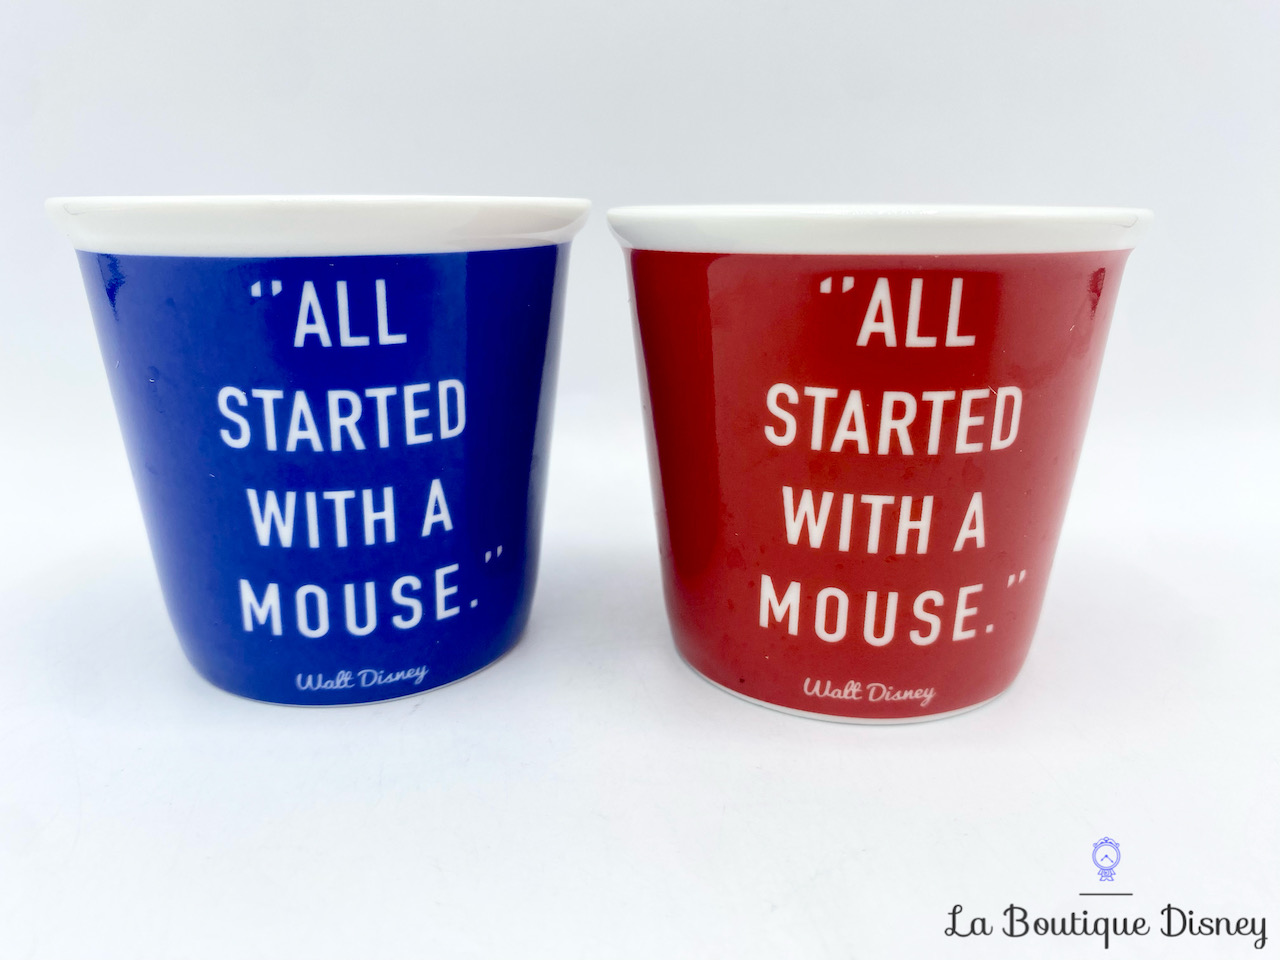 tasses-expresso-mickey-minnie-bleu-rouge-disneyland-paris-mug-disney-all-started-with-a-mouse-6